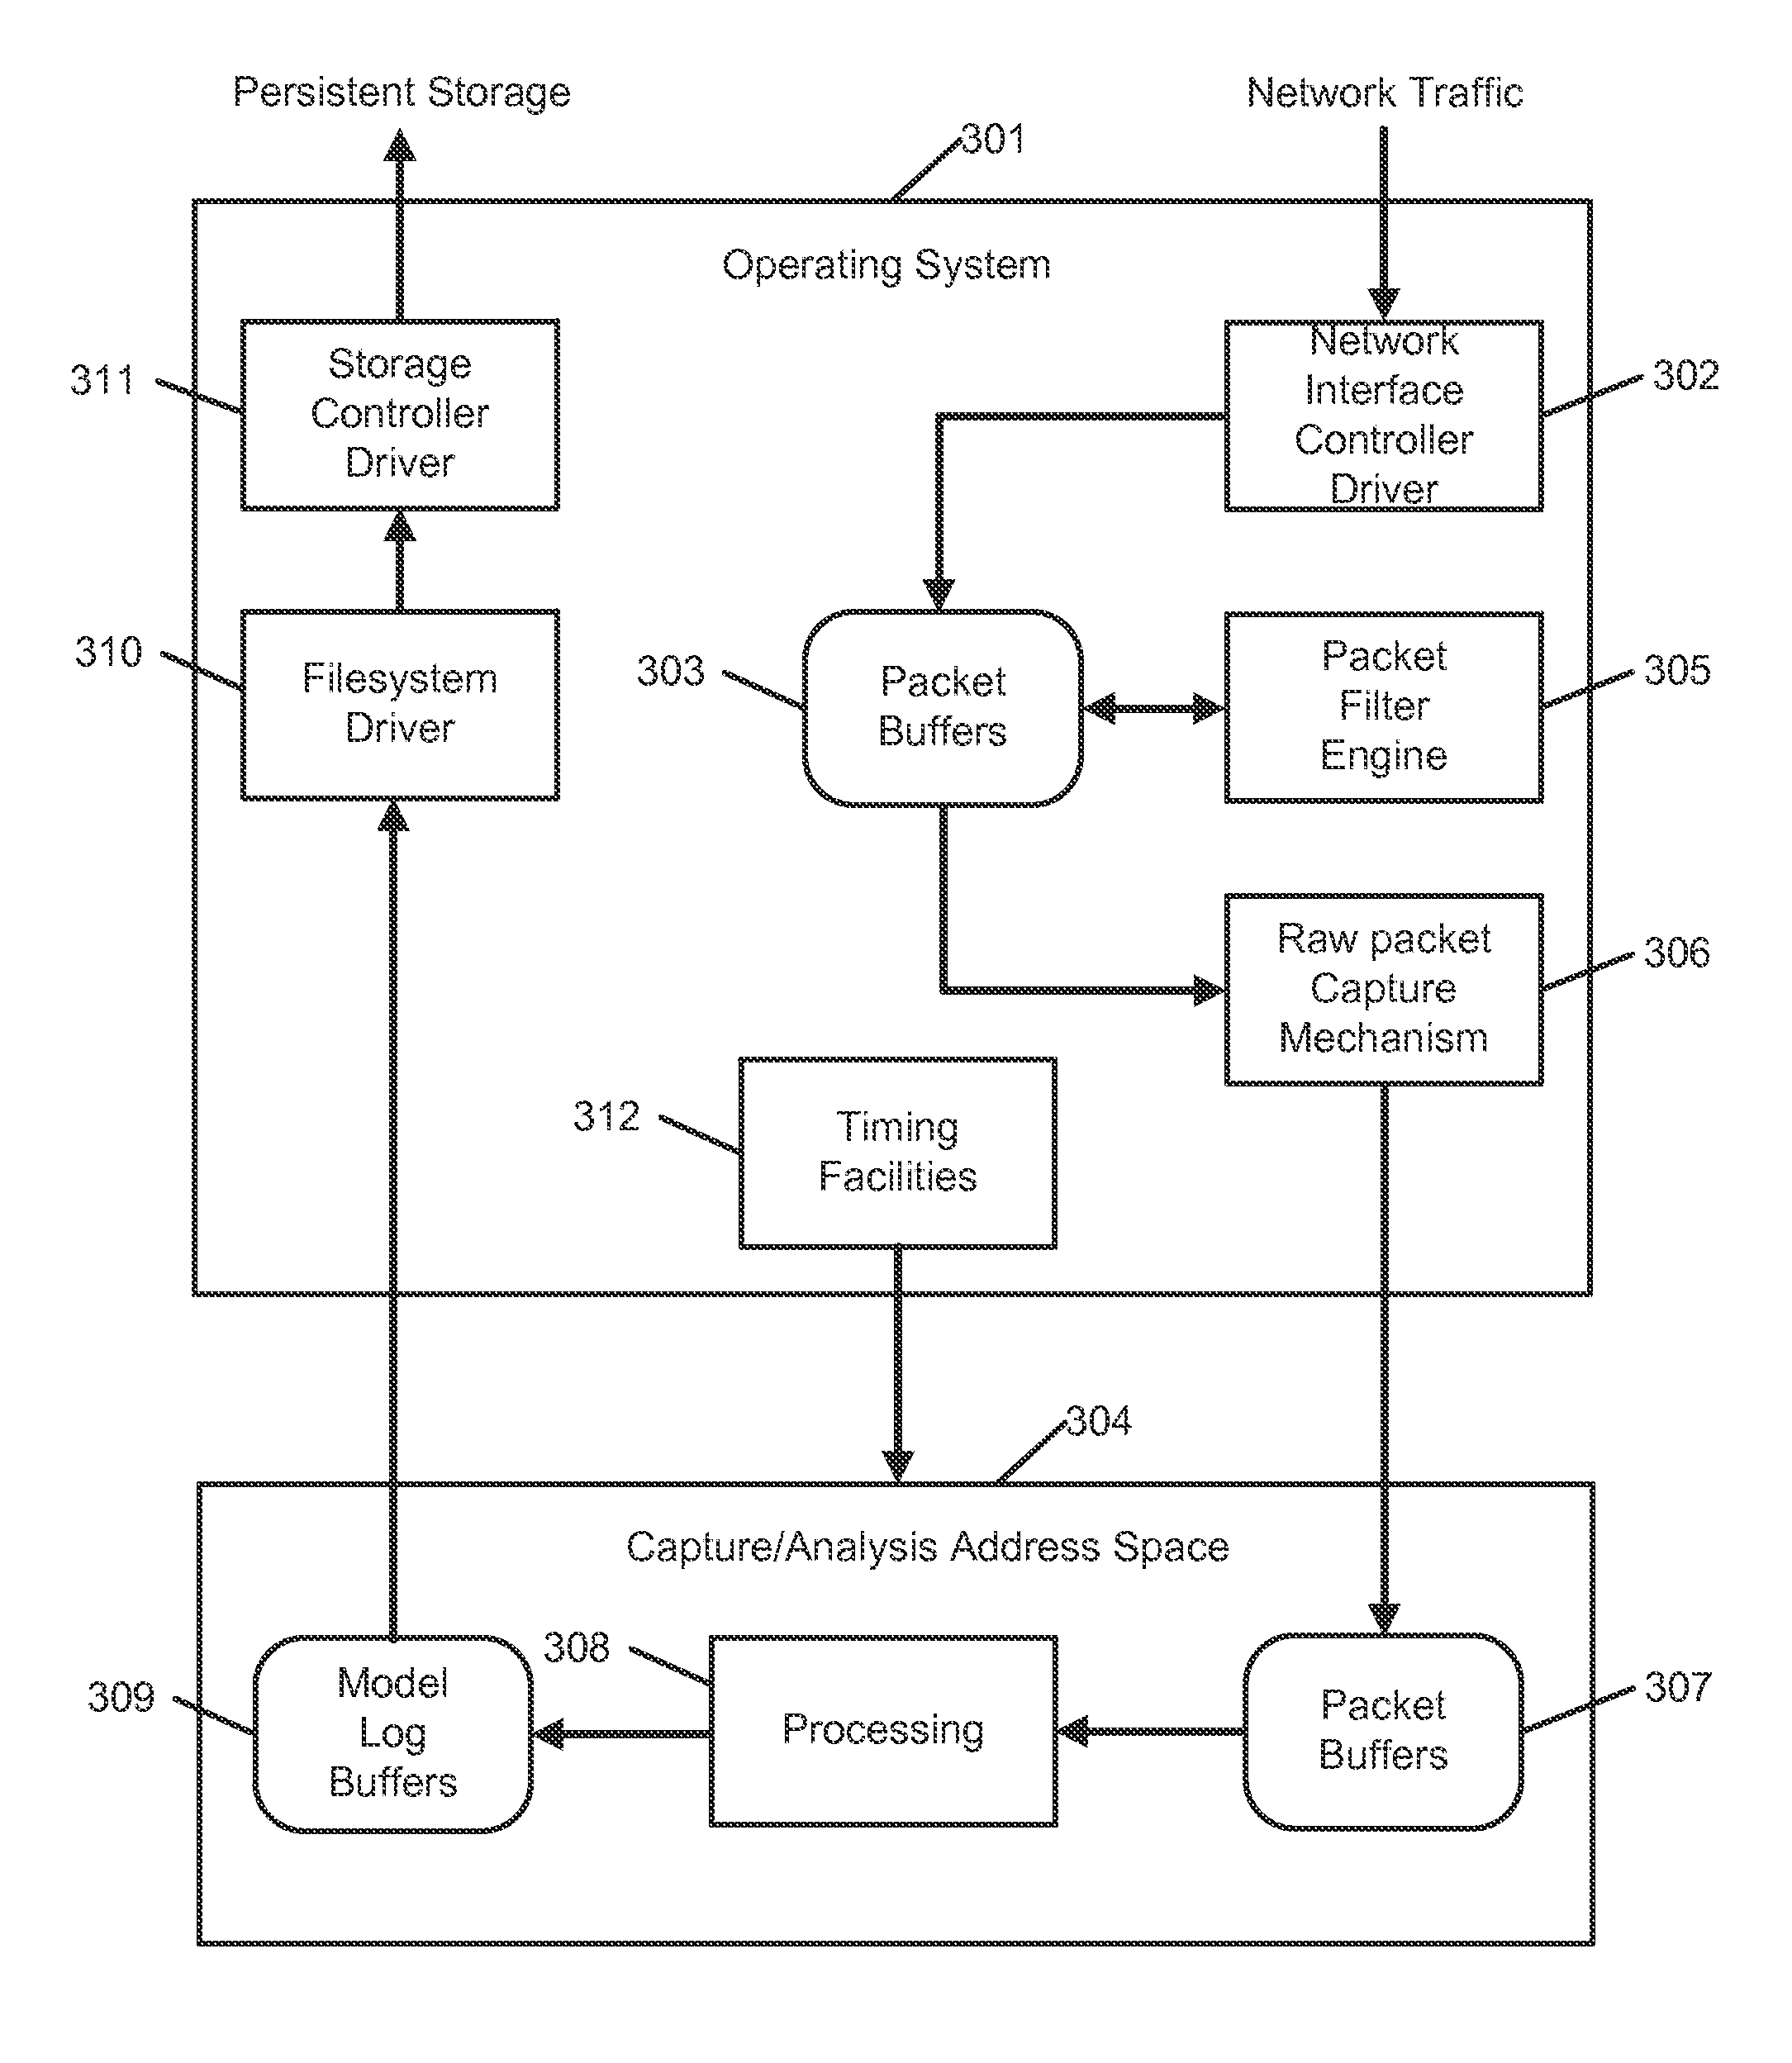 Systems and methods for detecting and mitigating threats to a structured data storage system